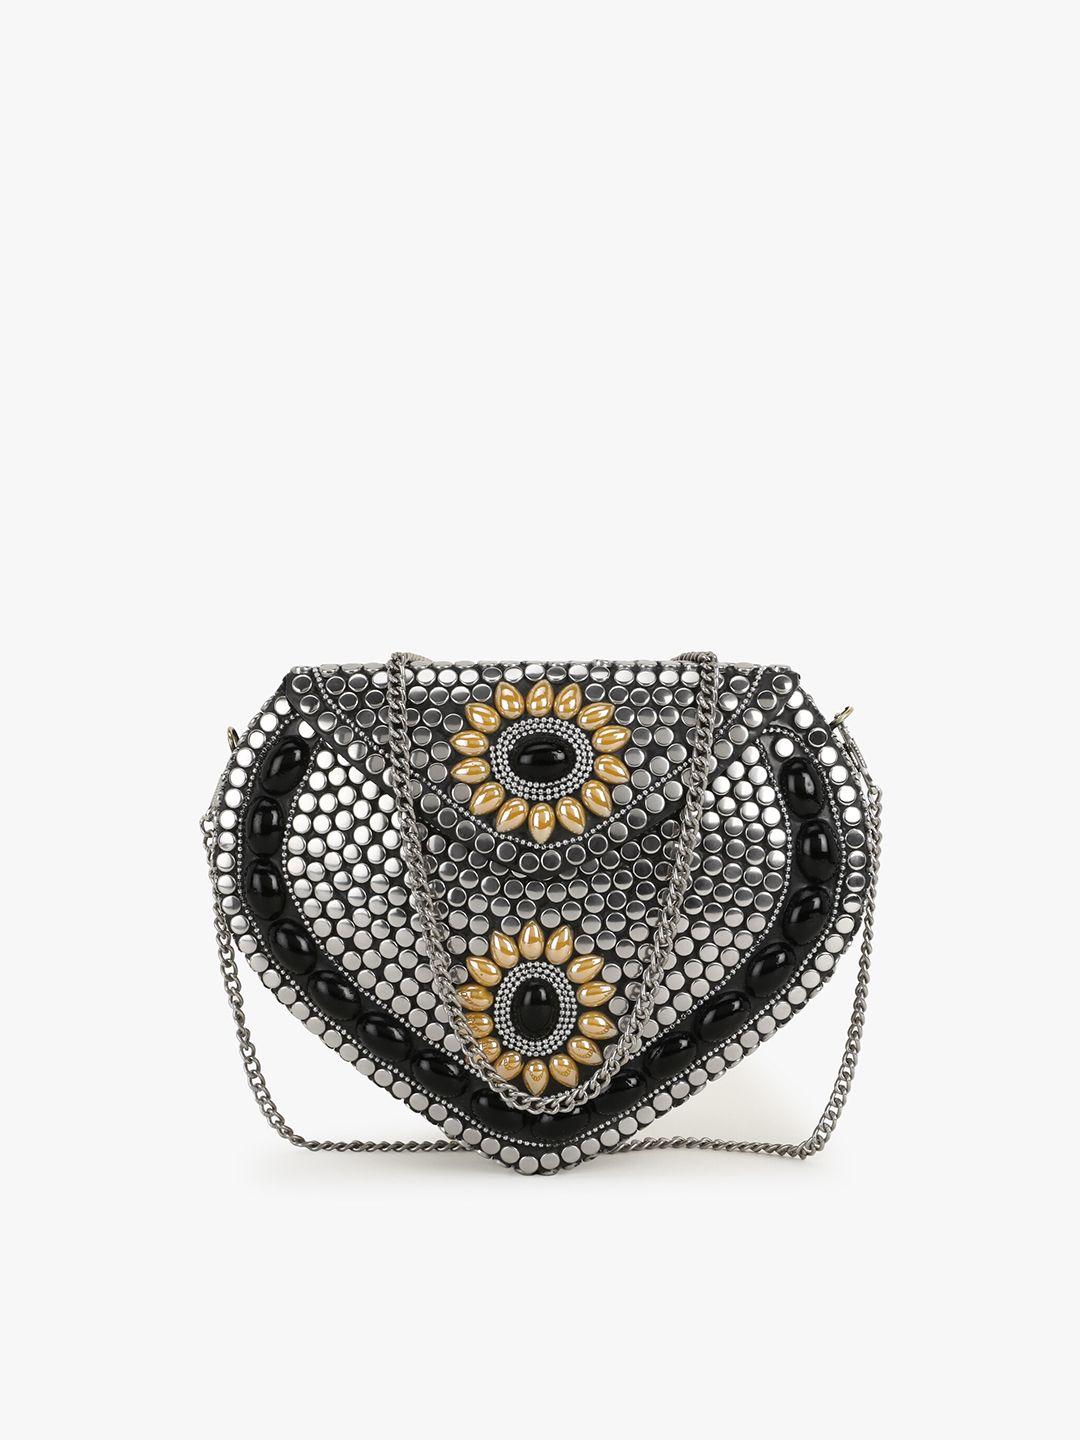 anekaant silver-toned & gold-toned embellished box clutch